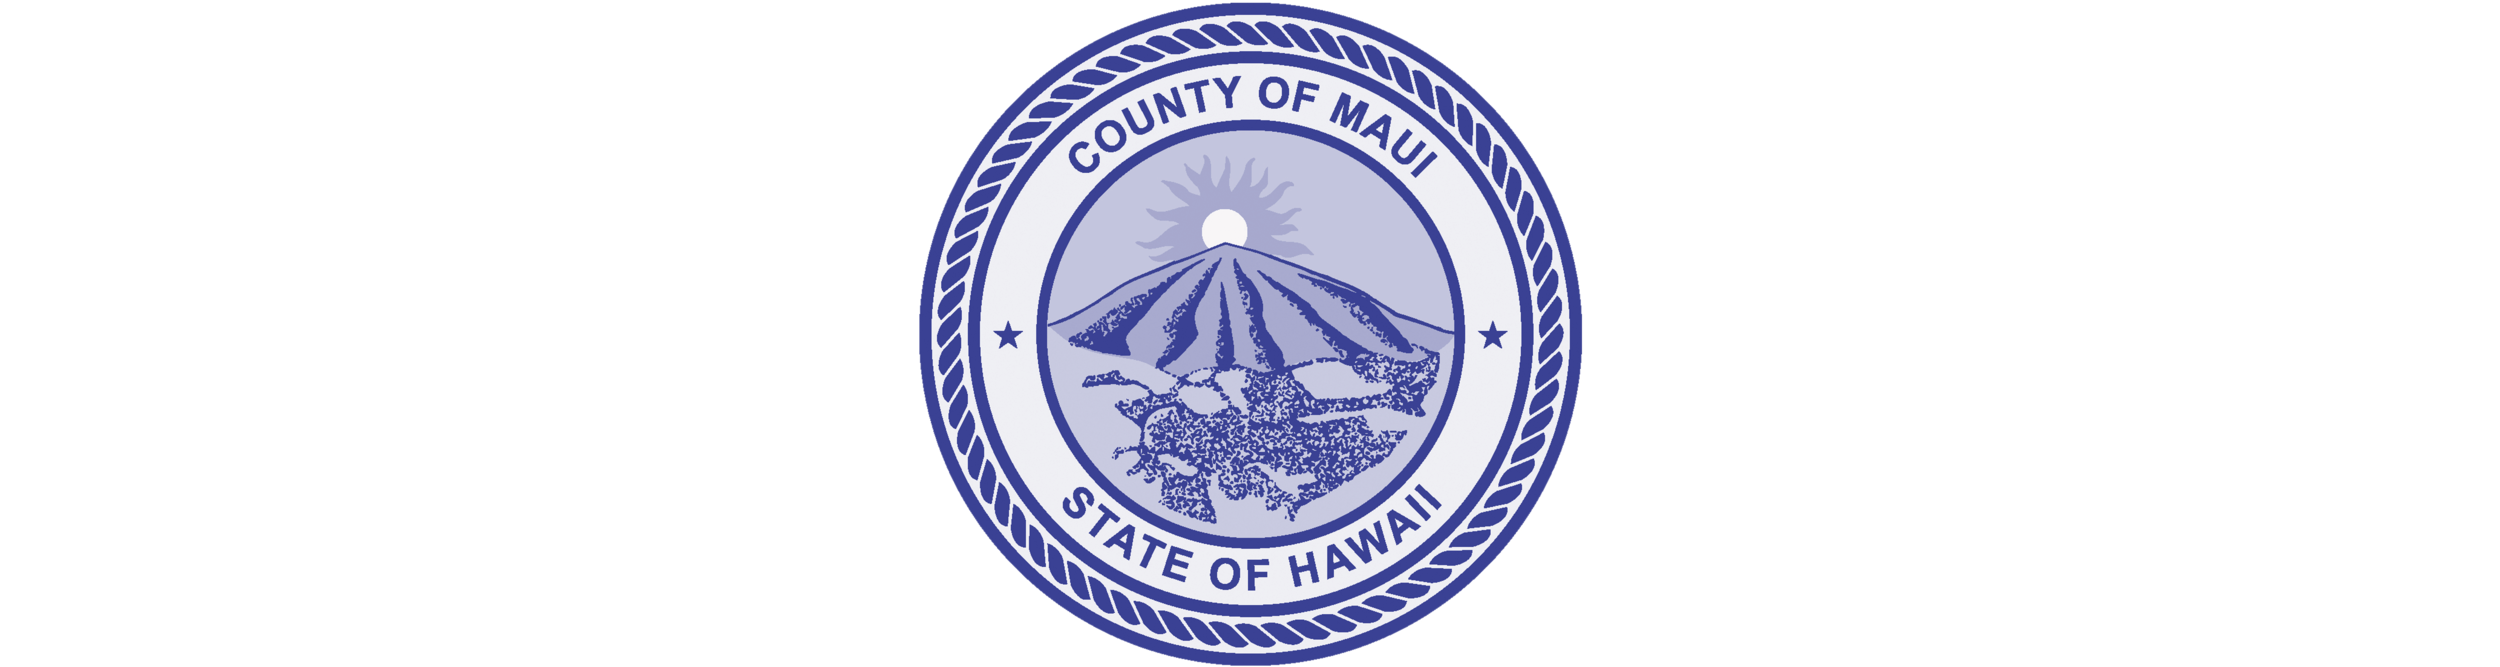 HPHA-resources-logo-Maui-County .png